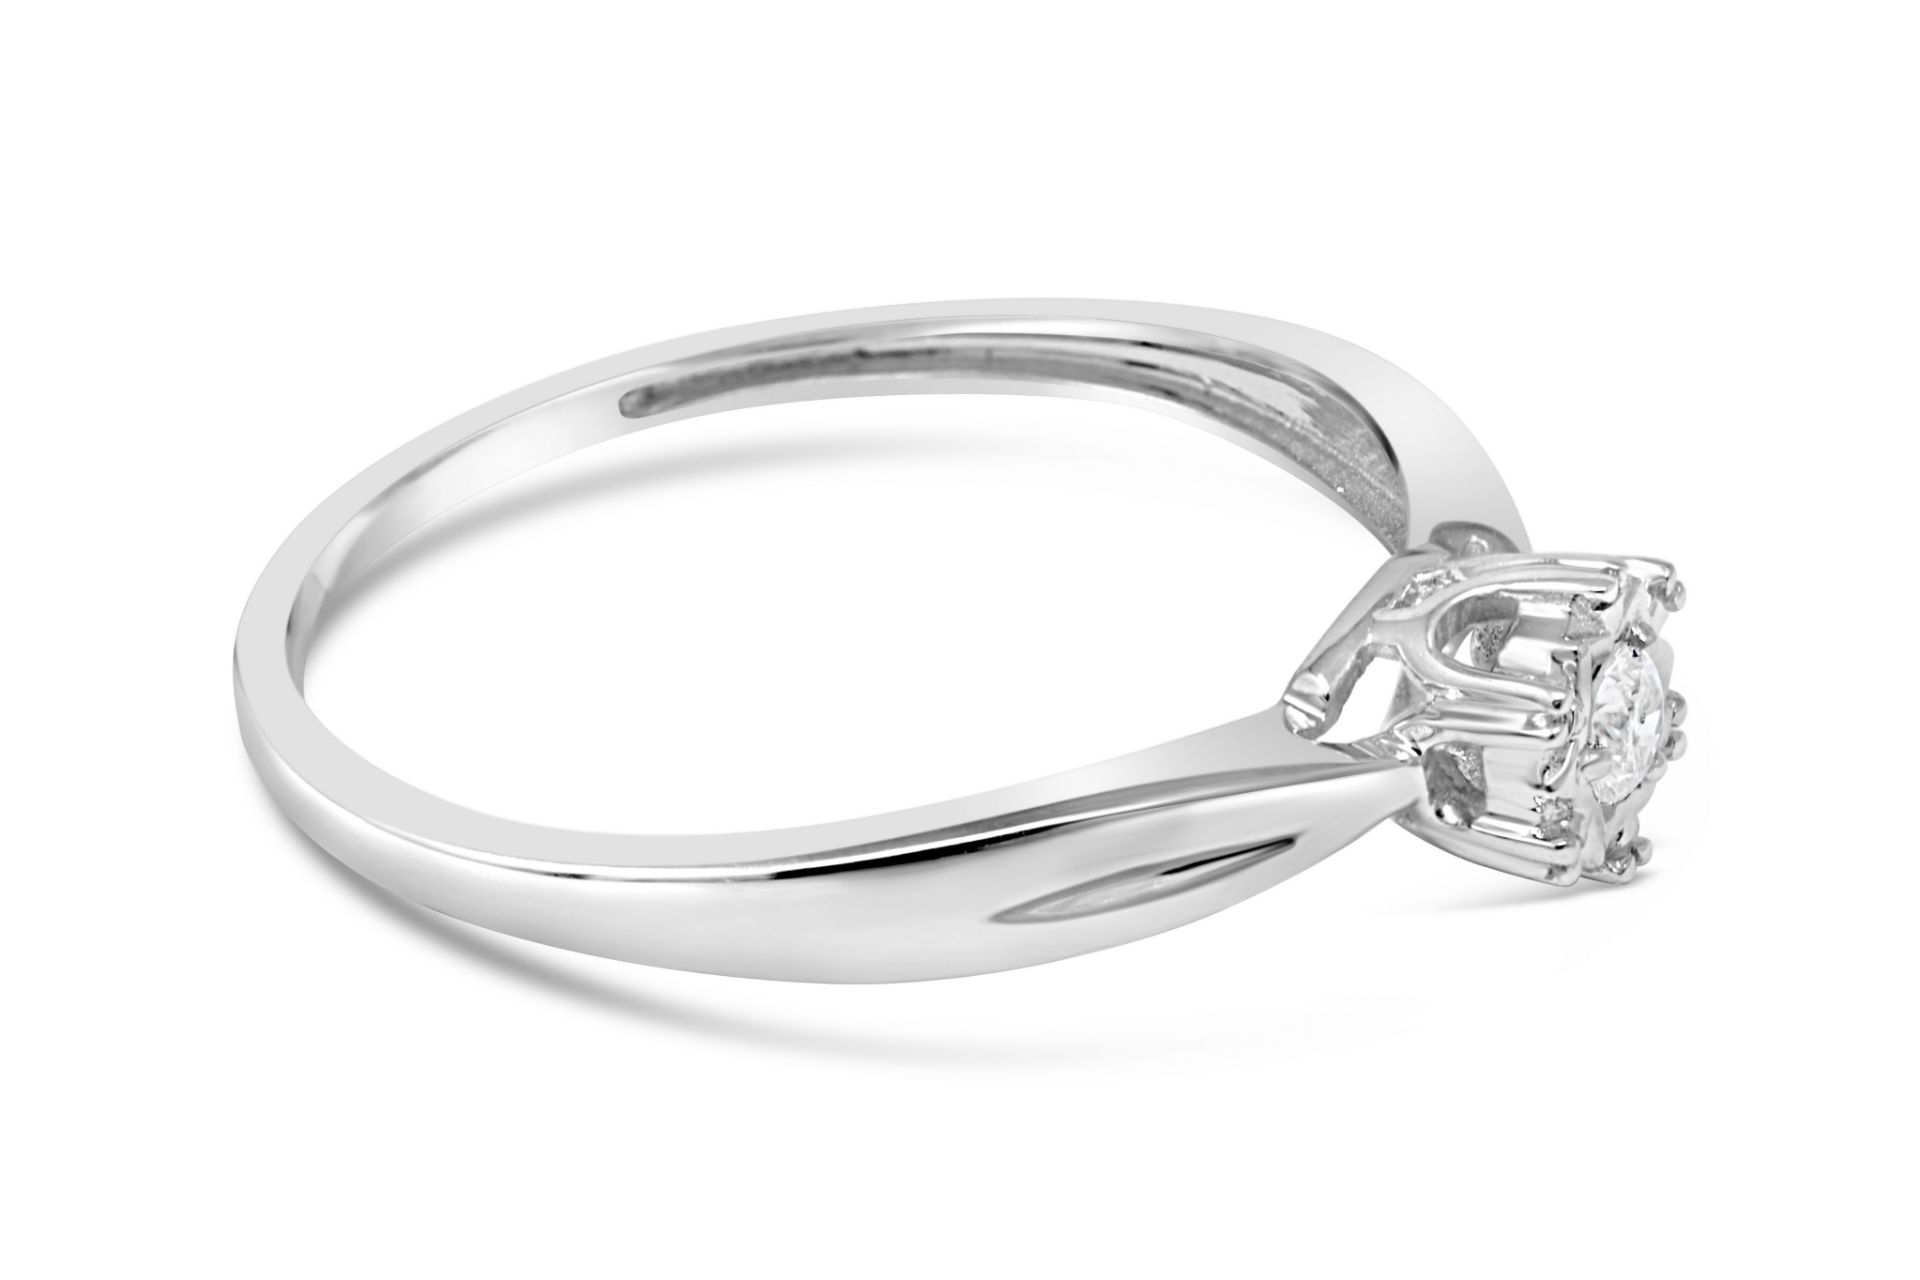 White Gold Diamond Solitaire, Metal 9ct White Gold, Weight (g) 1.2, Diamond Weight (ct) 1.6, Size Q, - Image 2 of 4